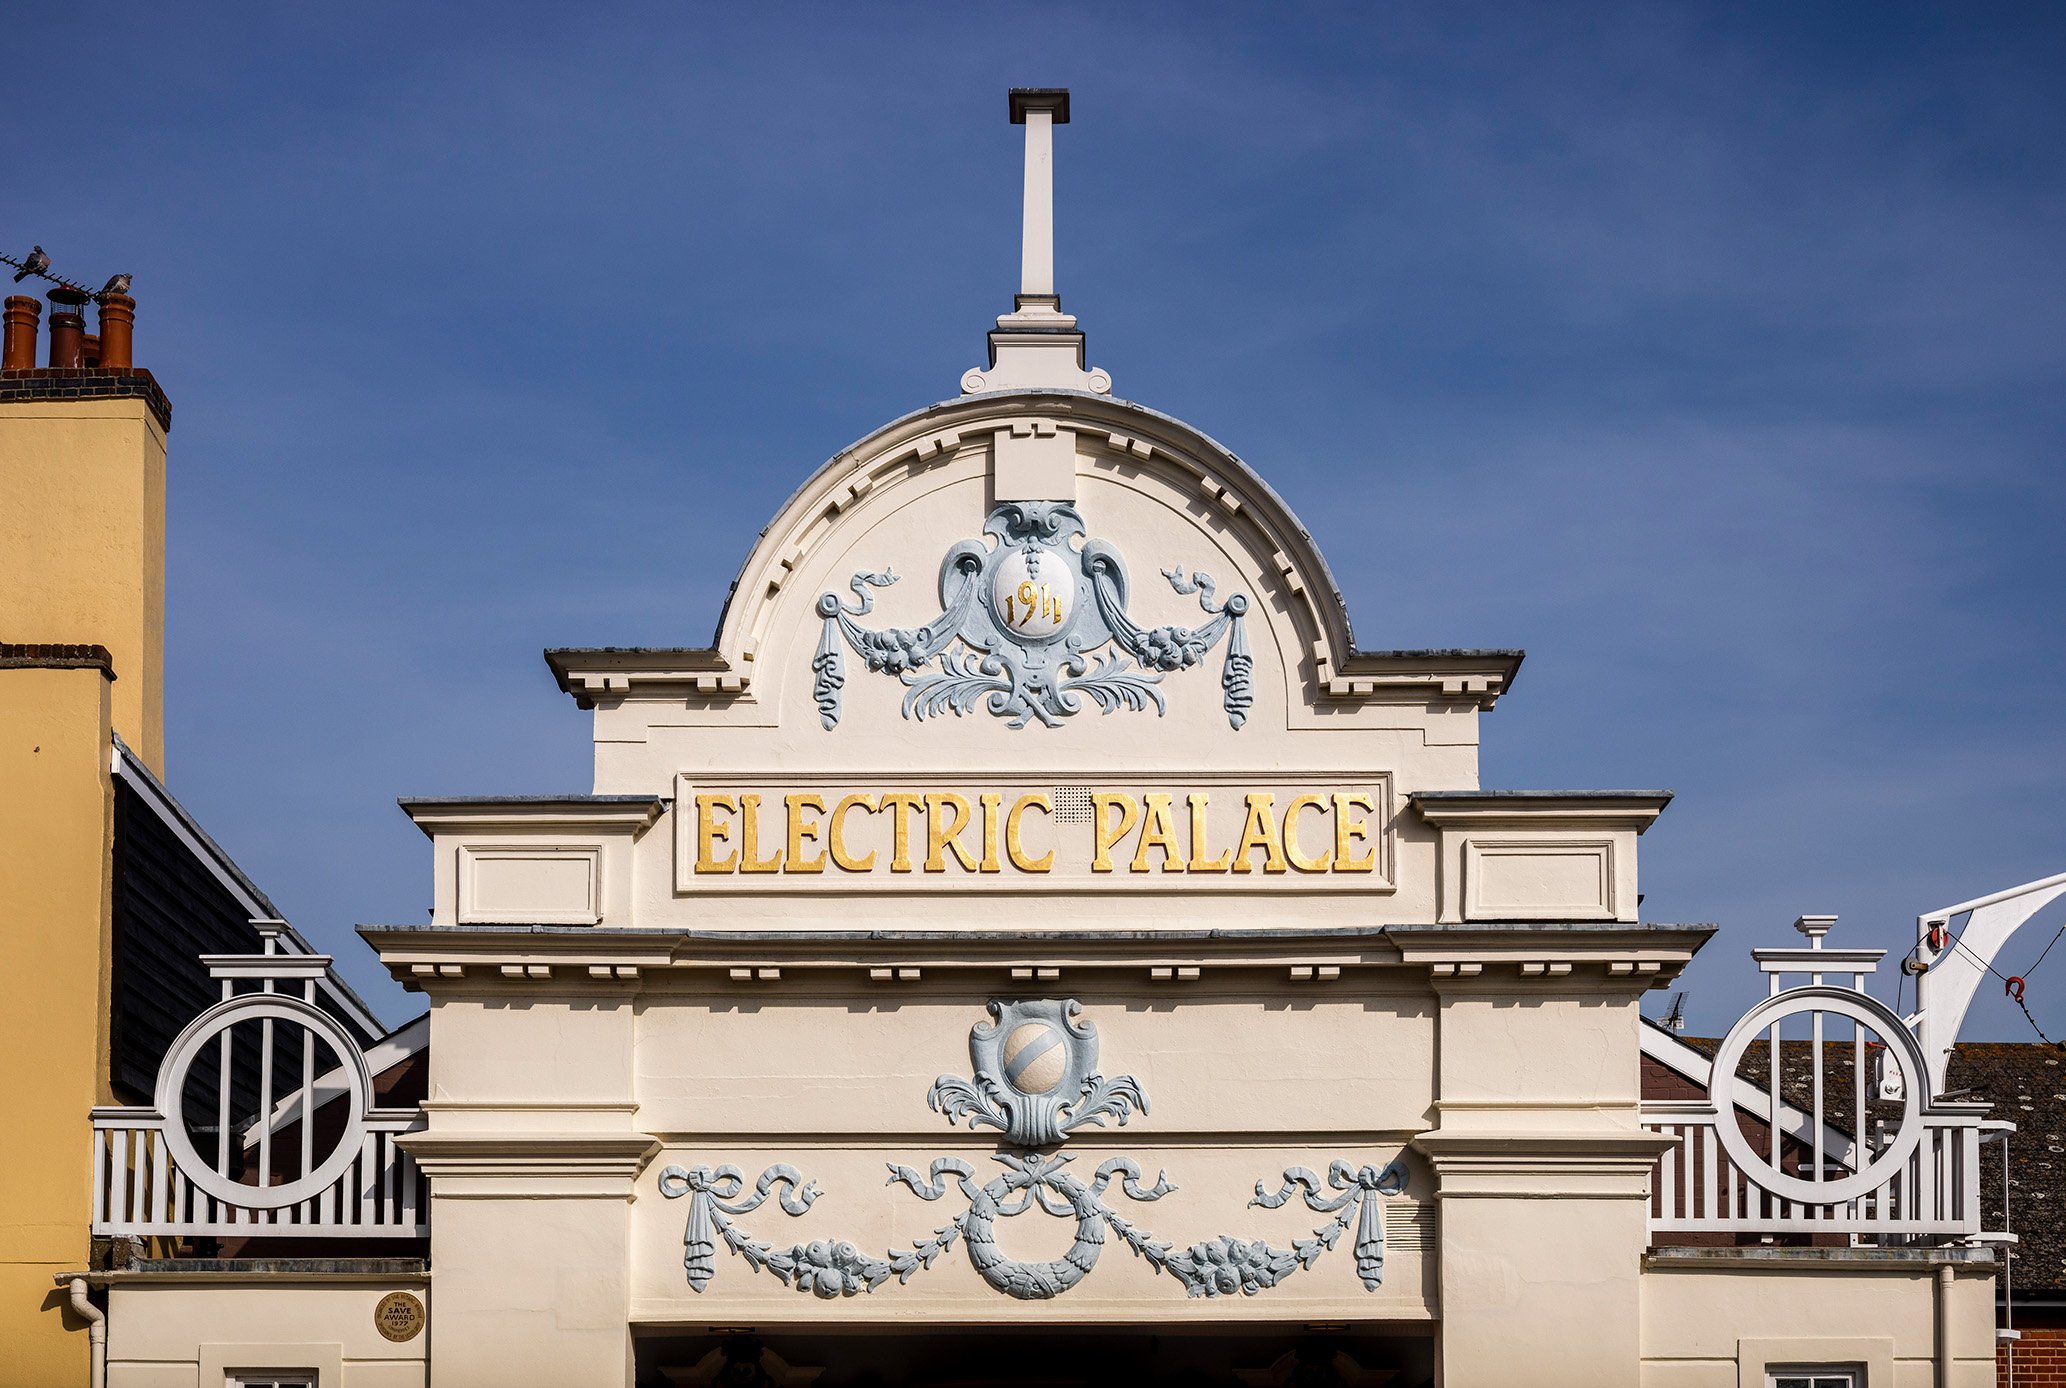 The facade at the top of the exterior entrance to the Electric Palace Cinema shows scrolling decoration and the words 1911 and Electric Palace within an arched top section of the facade.